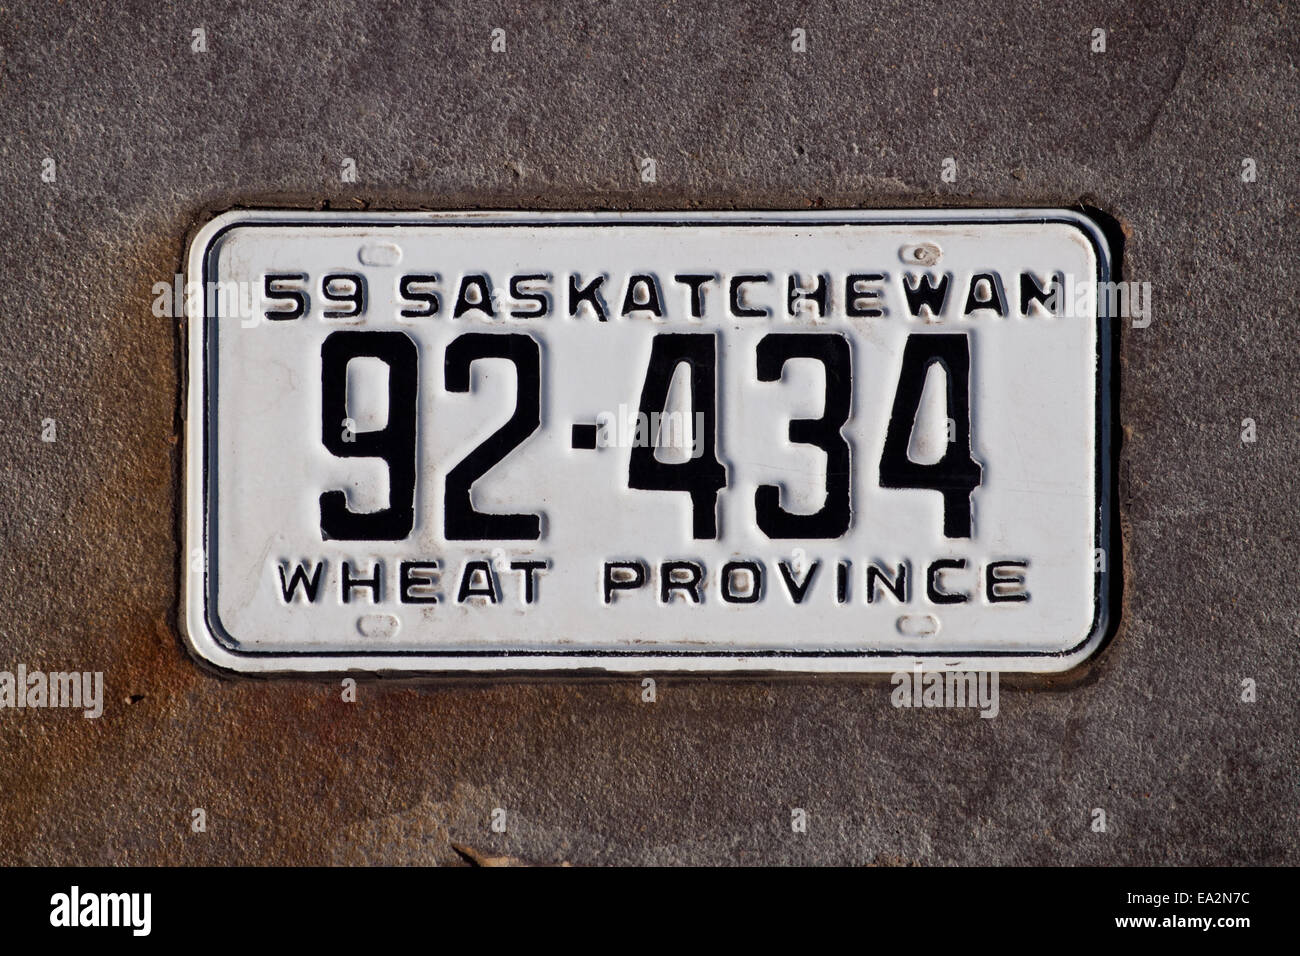 An old, vintage 1959 Province of Saskatchewan (Canada) vehicle license plate as part of an exhibit at River Landing, Saskatoon. Stock Photo